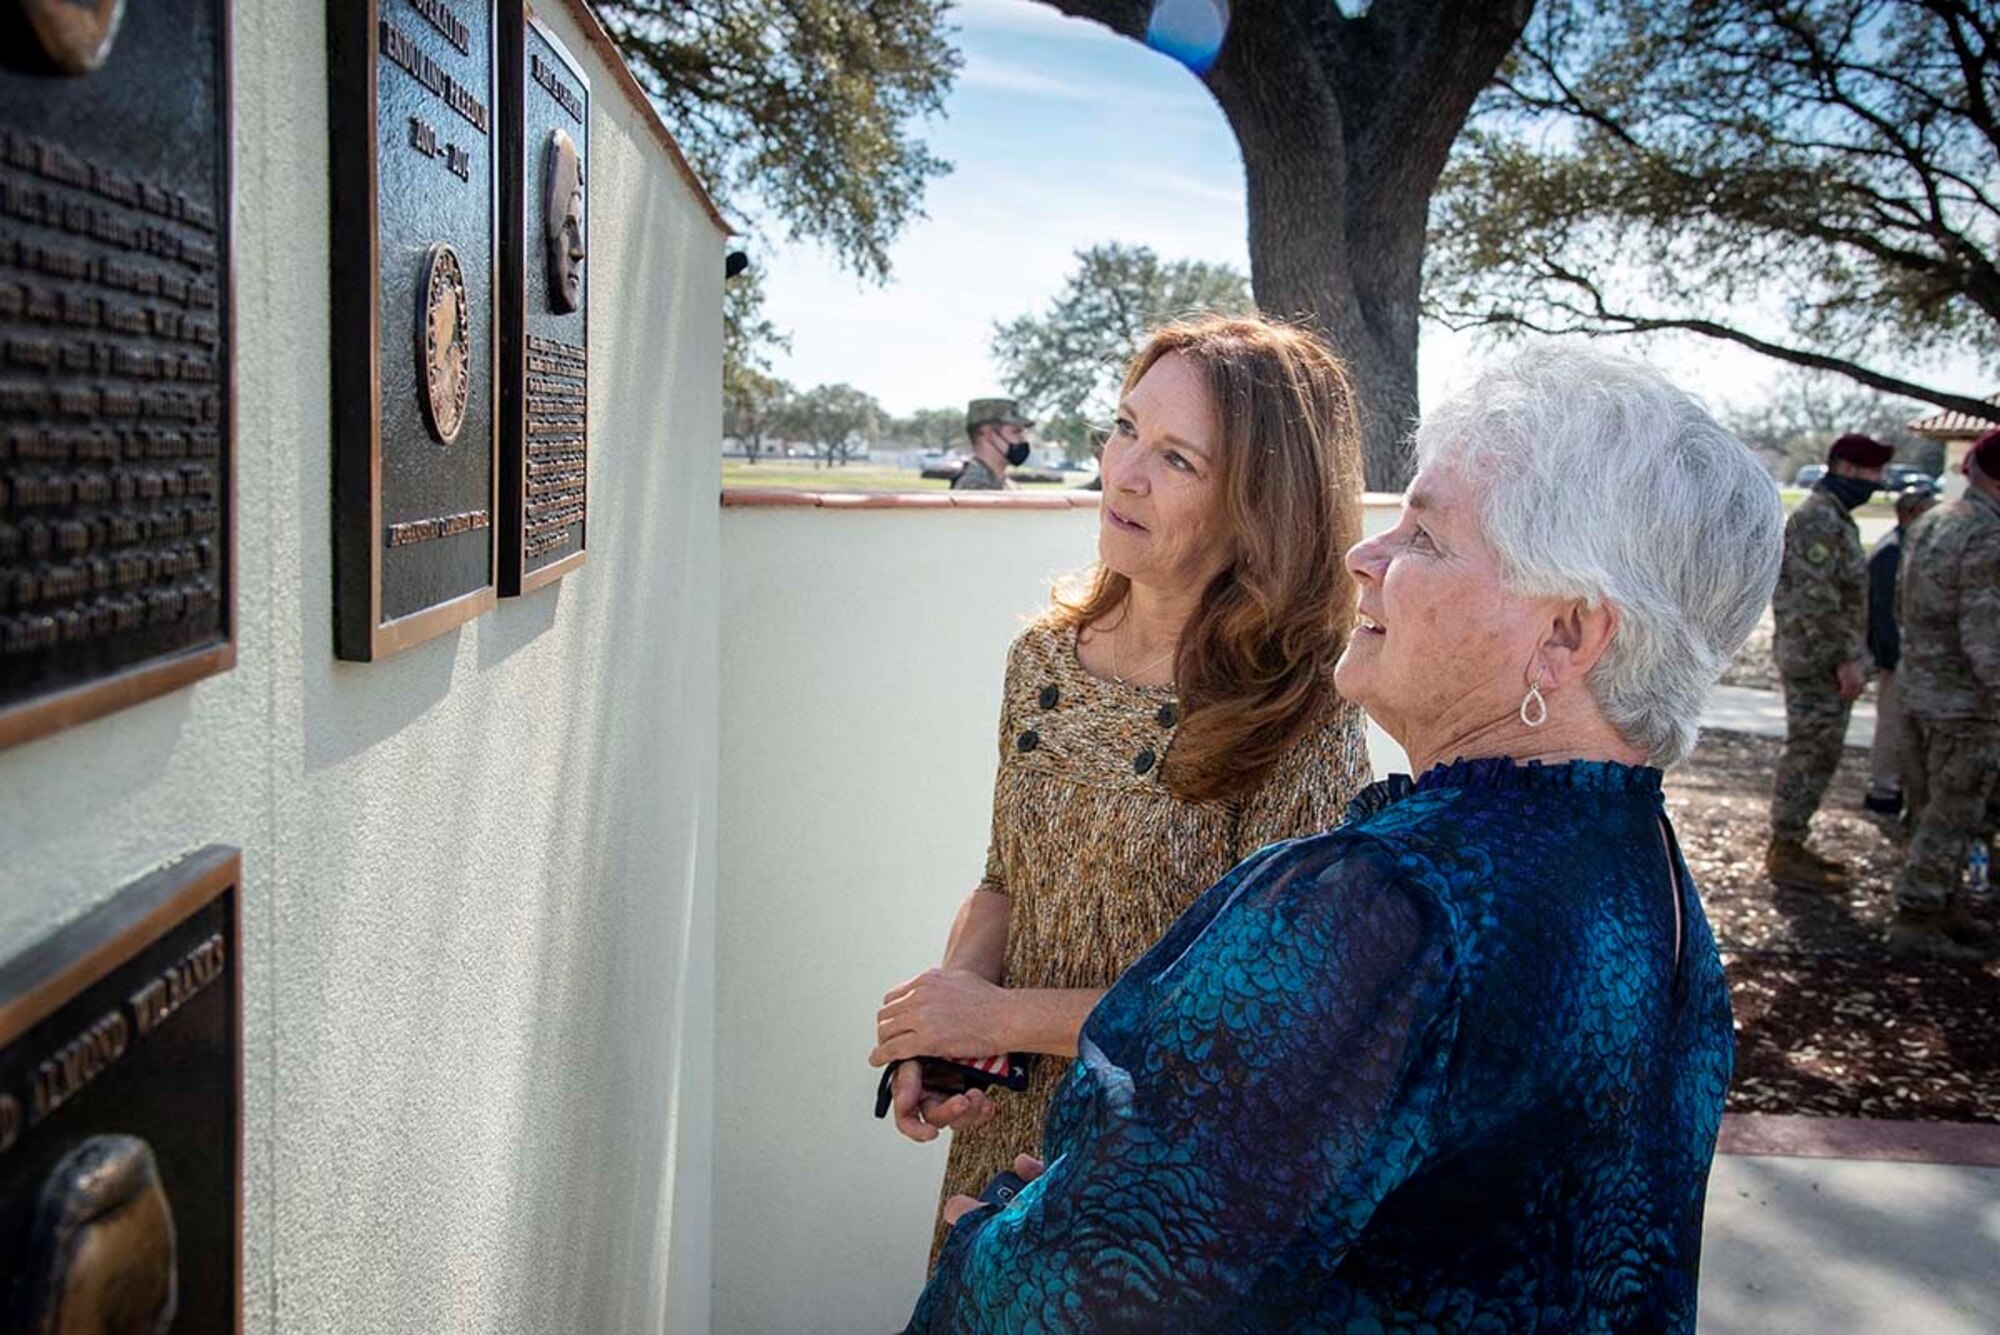 Valerie Nessel (left), Medal of Honor recipient John Chapman’s spouse, and Terry Chapman, Chapman’s mother, view the plaque that was unveiled during a Medal of Honor plaque ceremony at Airmen’s Heritage Park at Joint Base San Antonio-Randolph March 4, 2021.